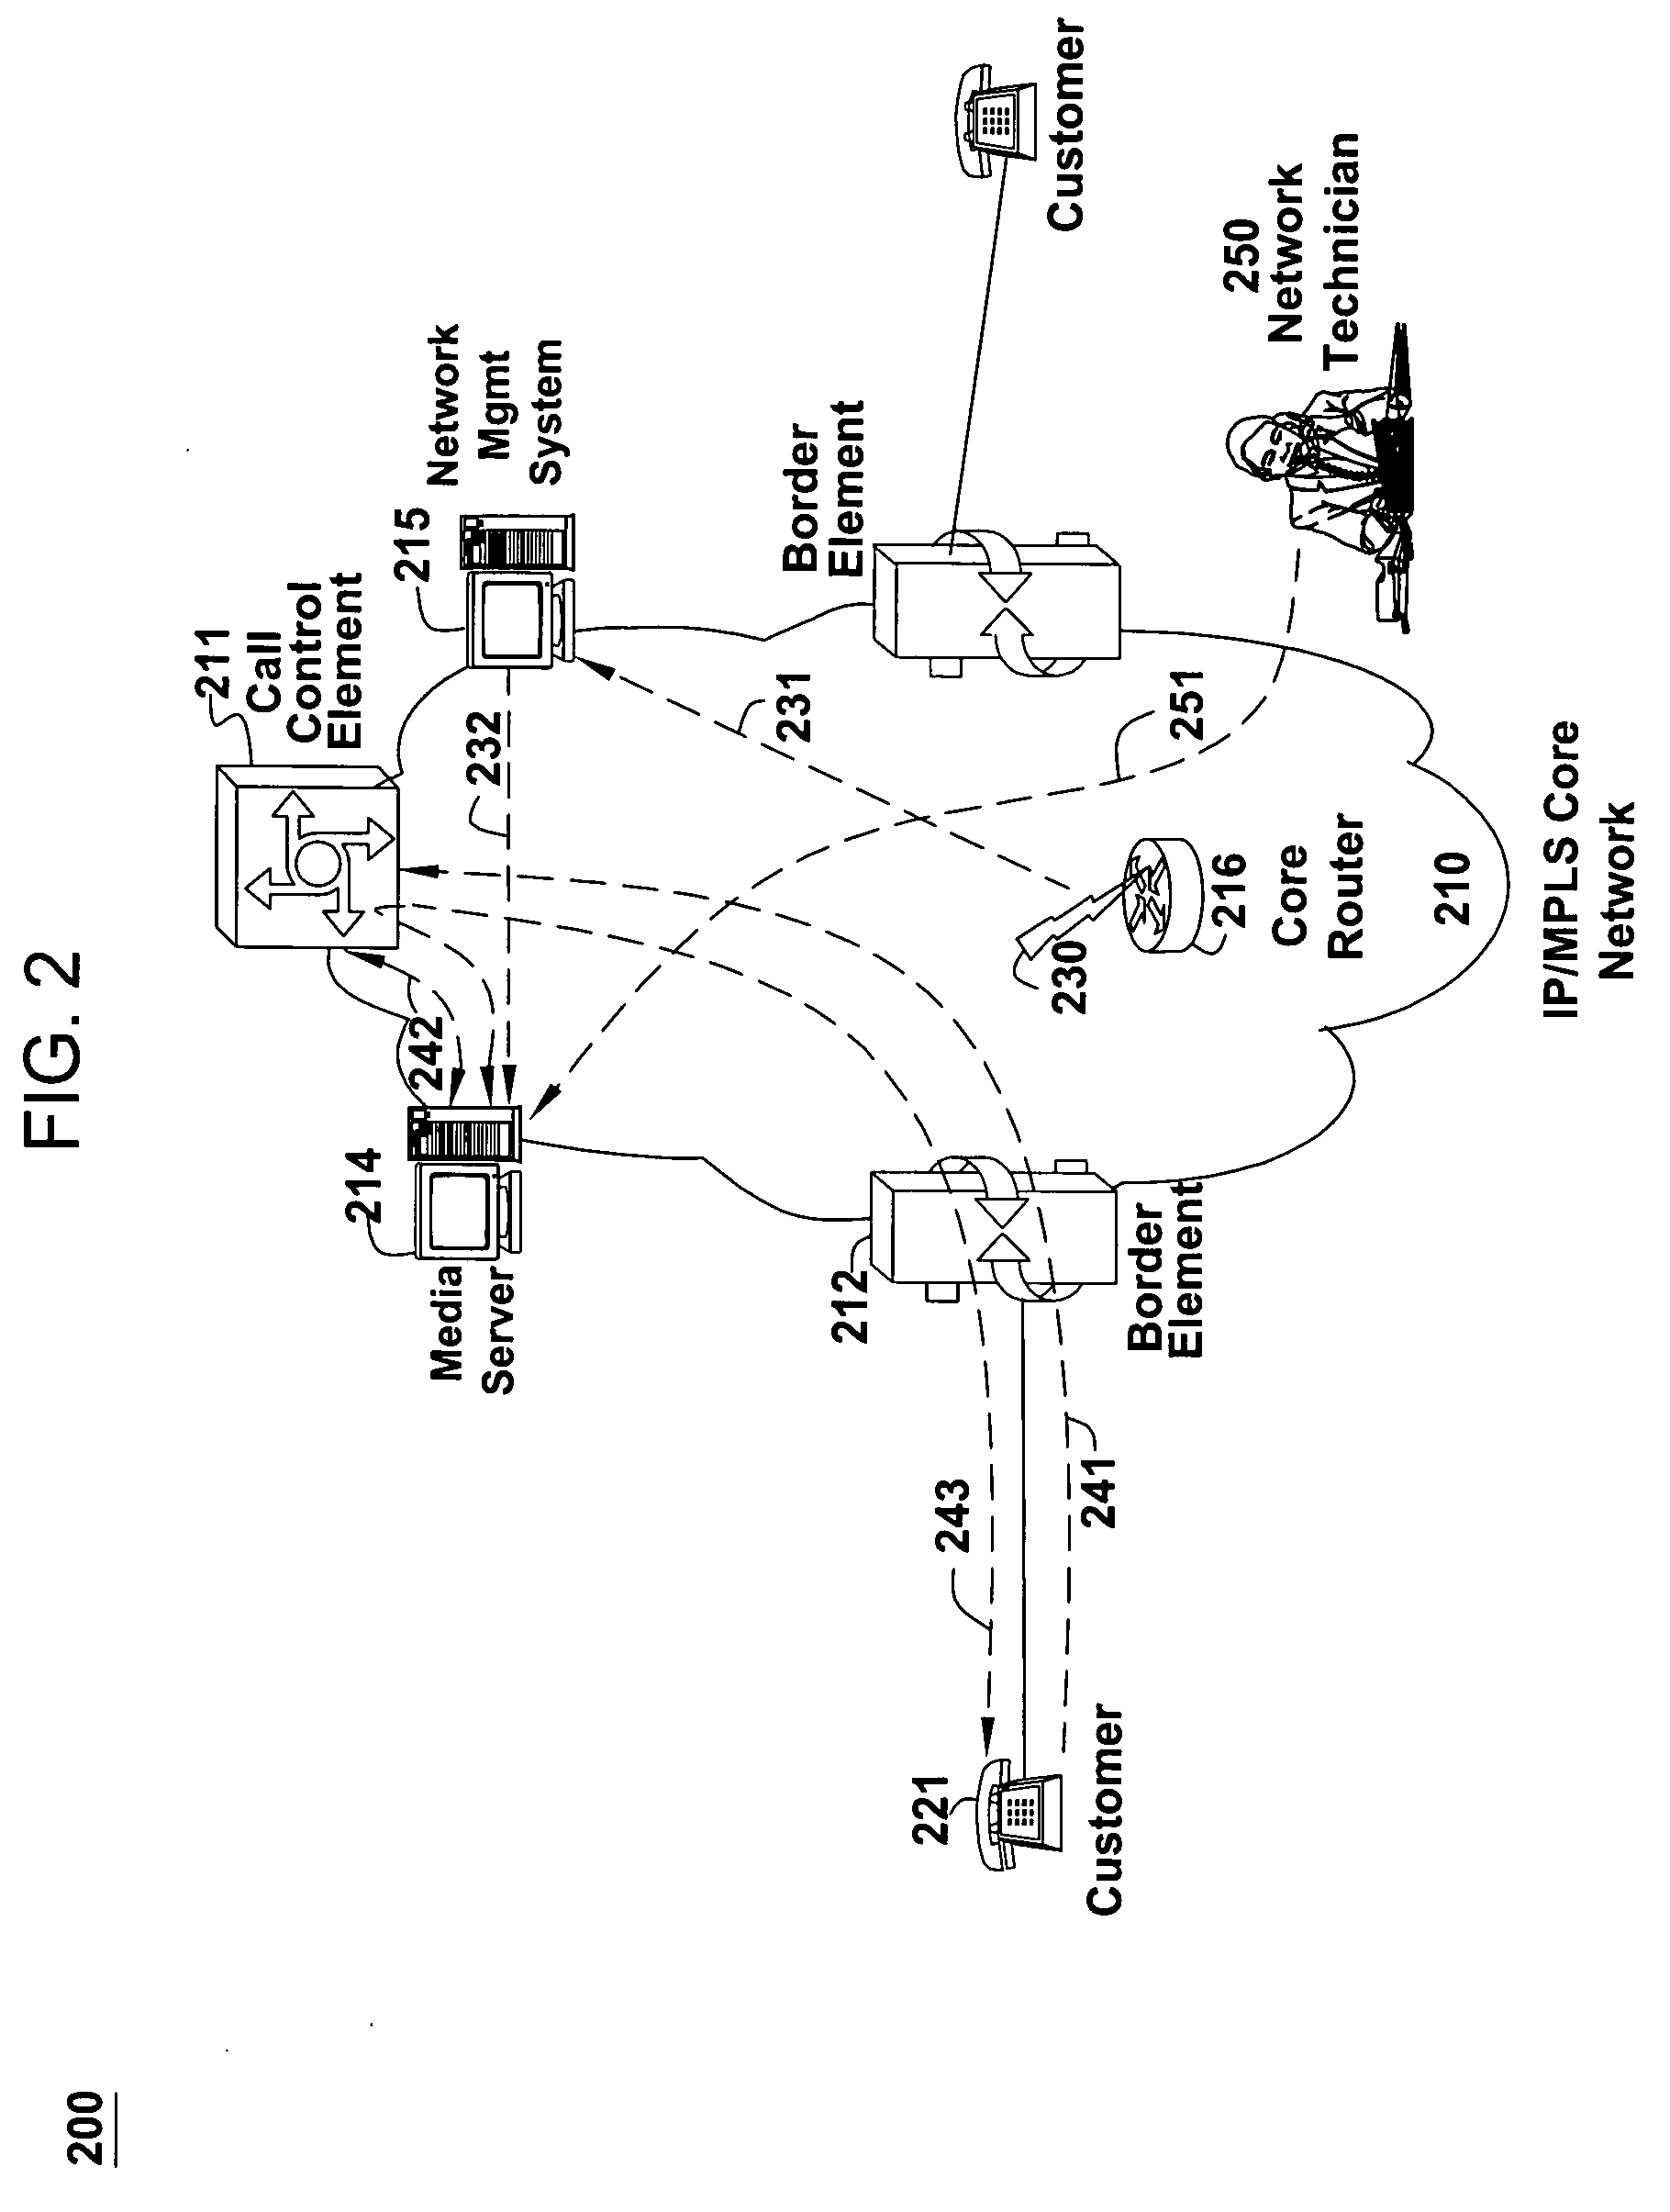 Method and apparatus for providing network announcements about service impairments